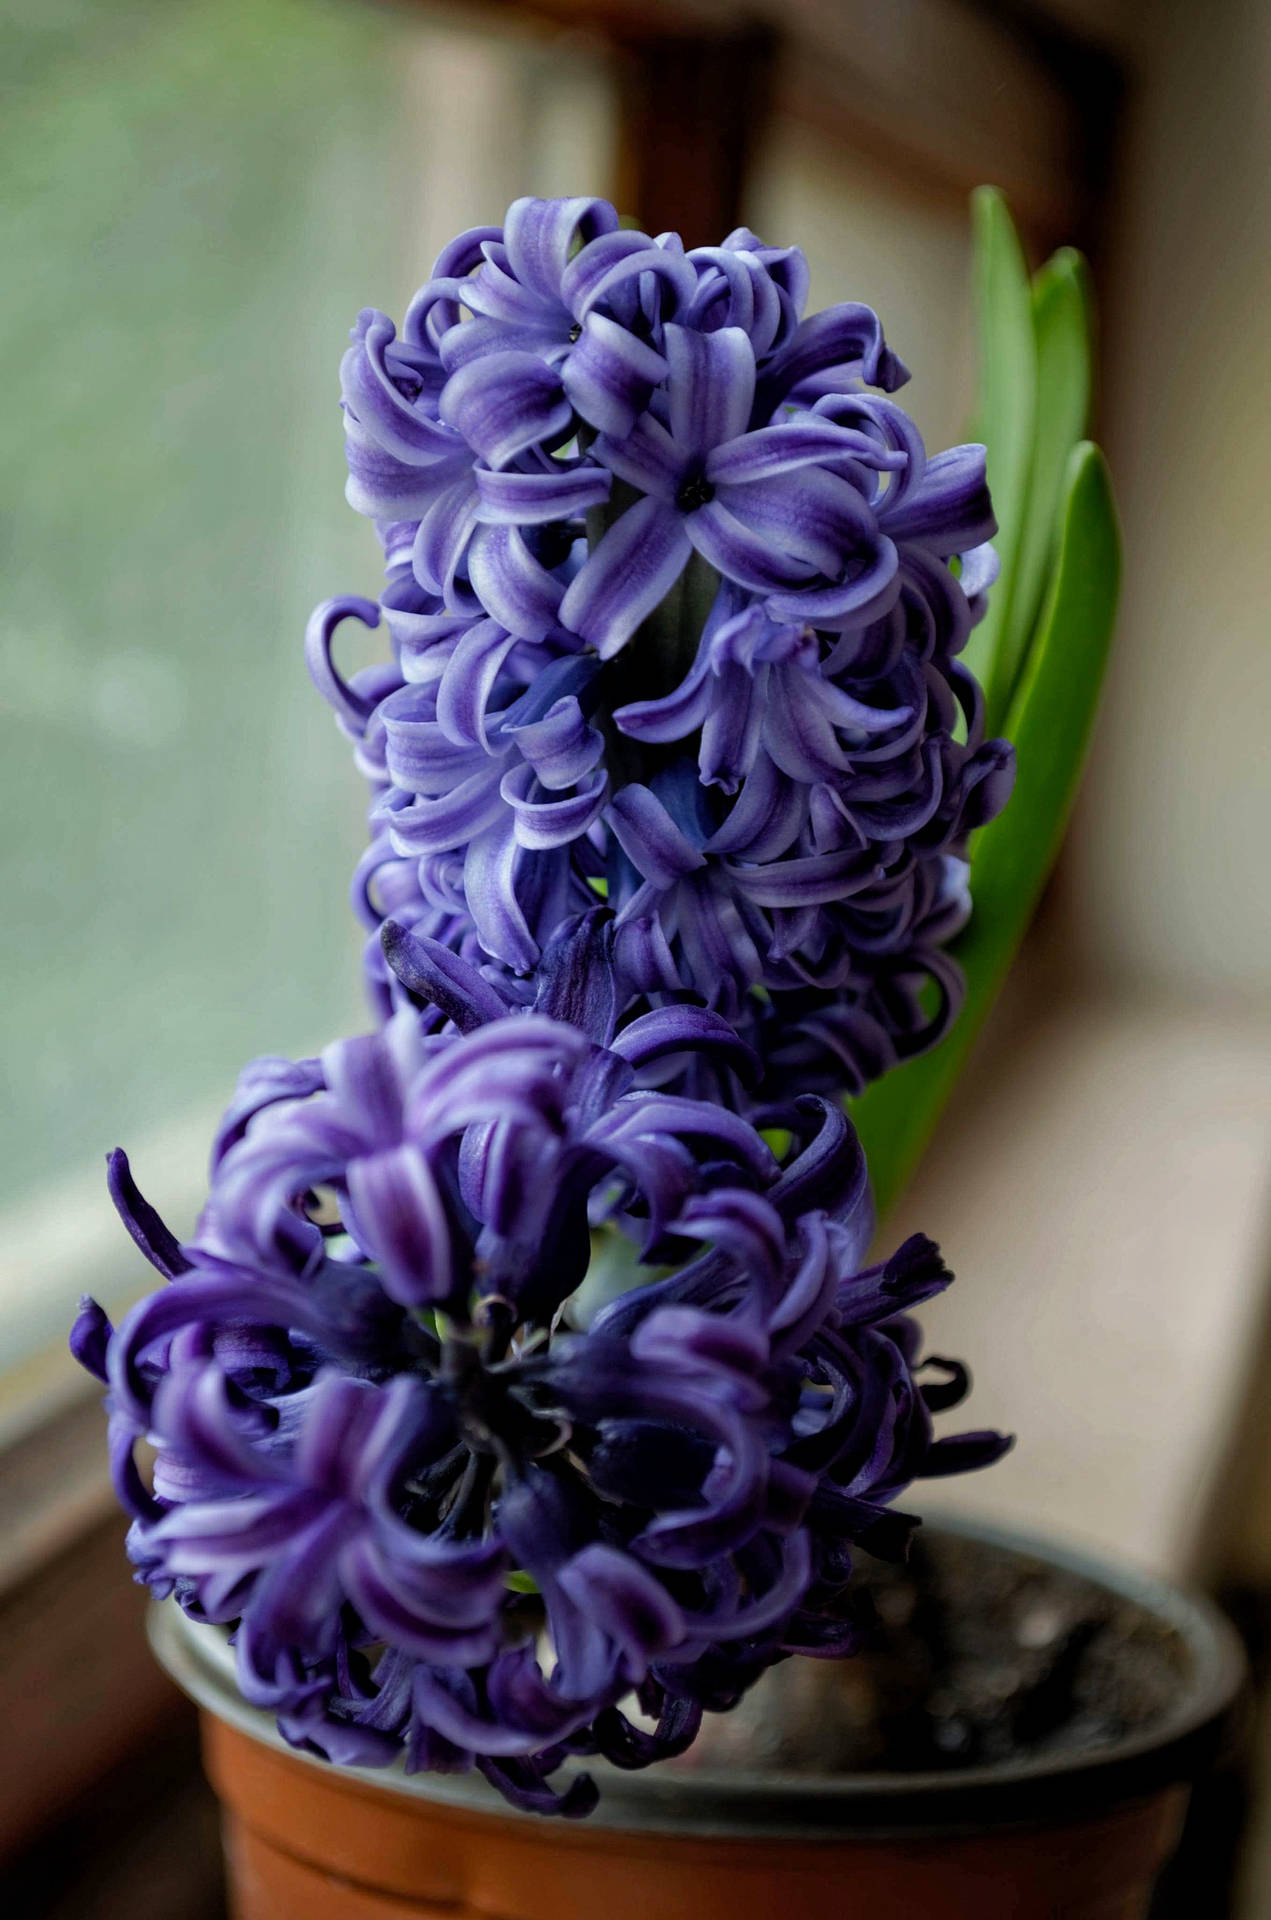 Potted Purple Hyacinth Flower Background